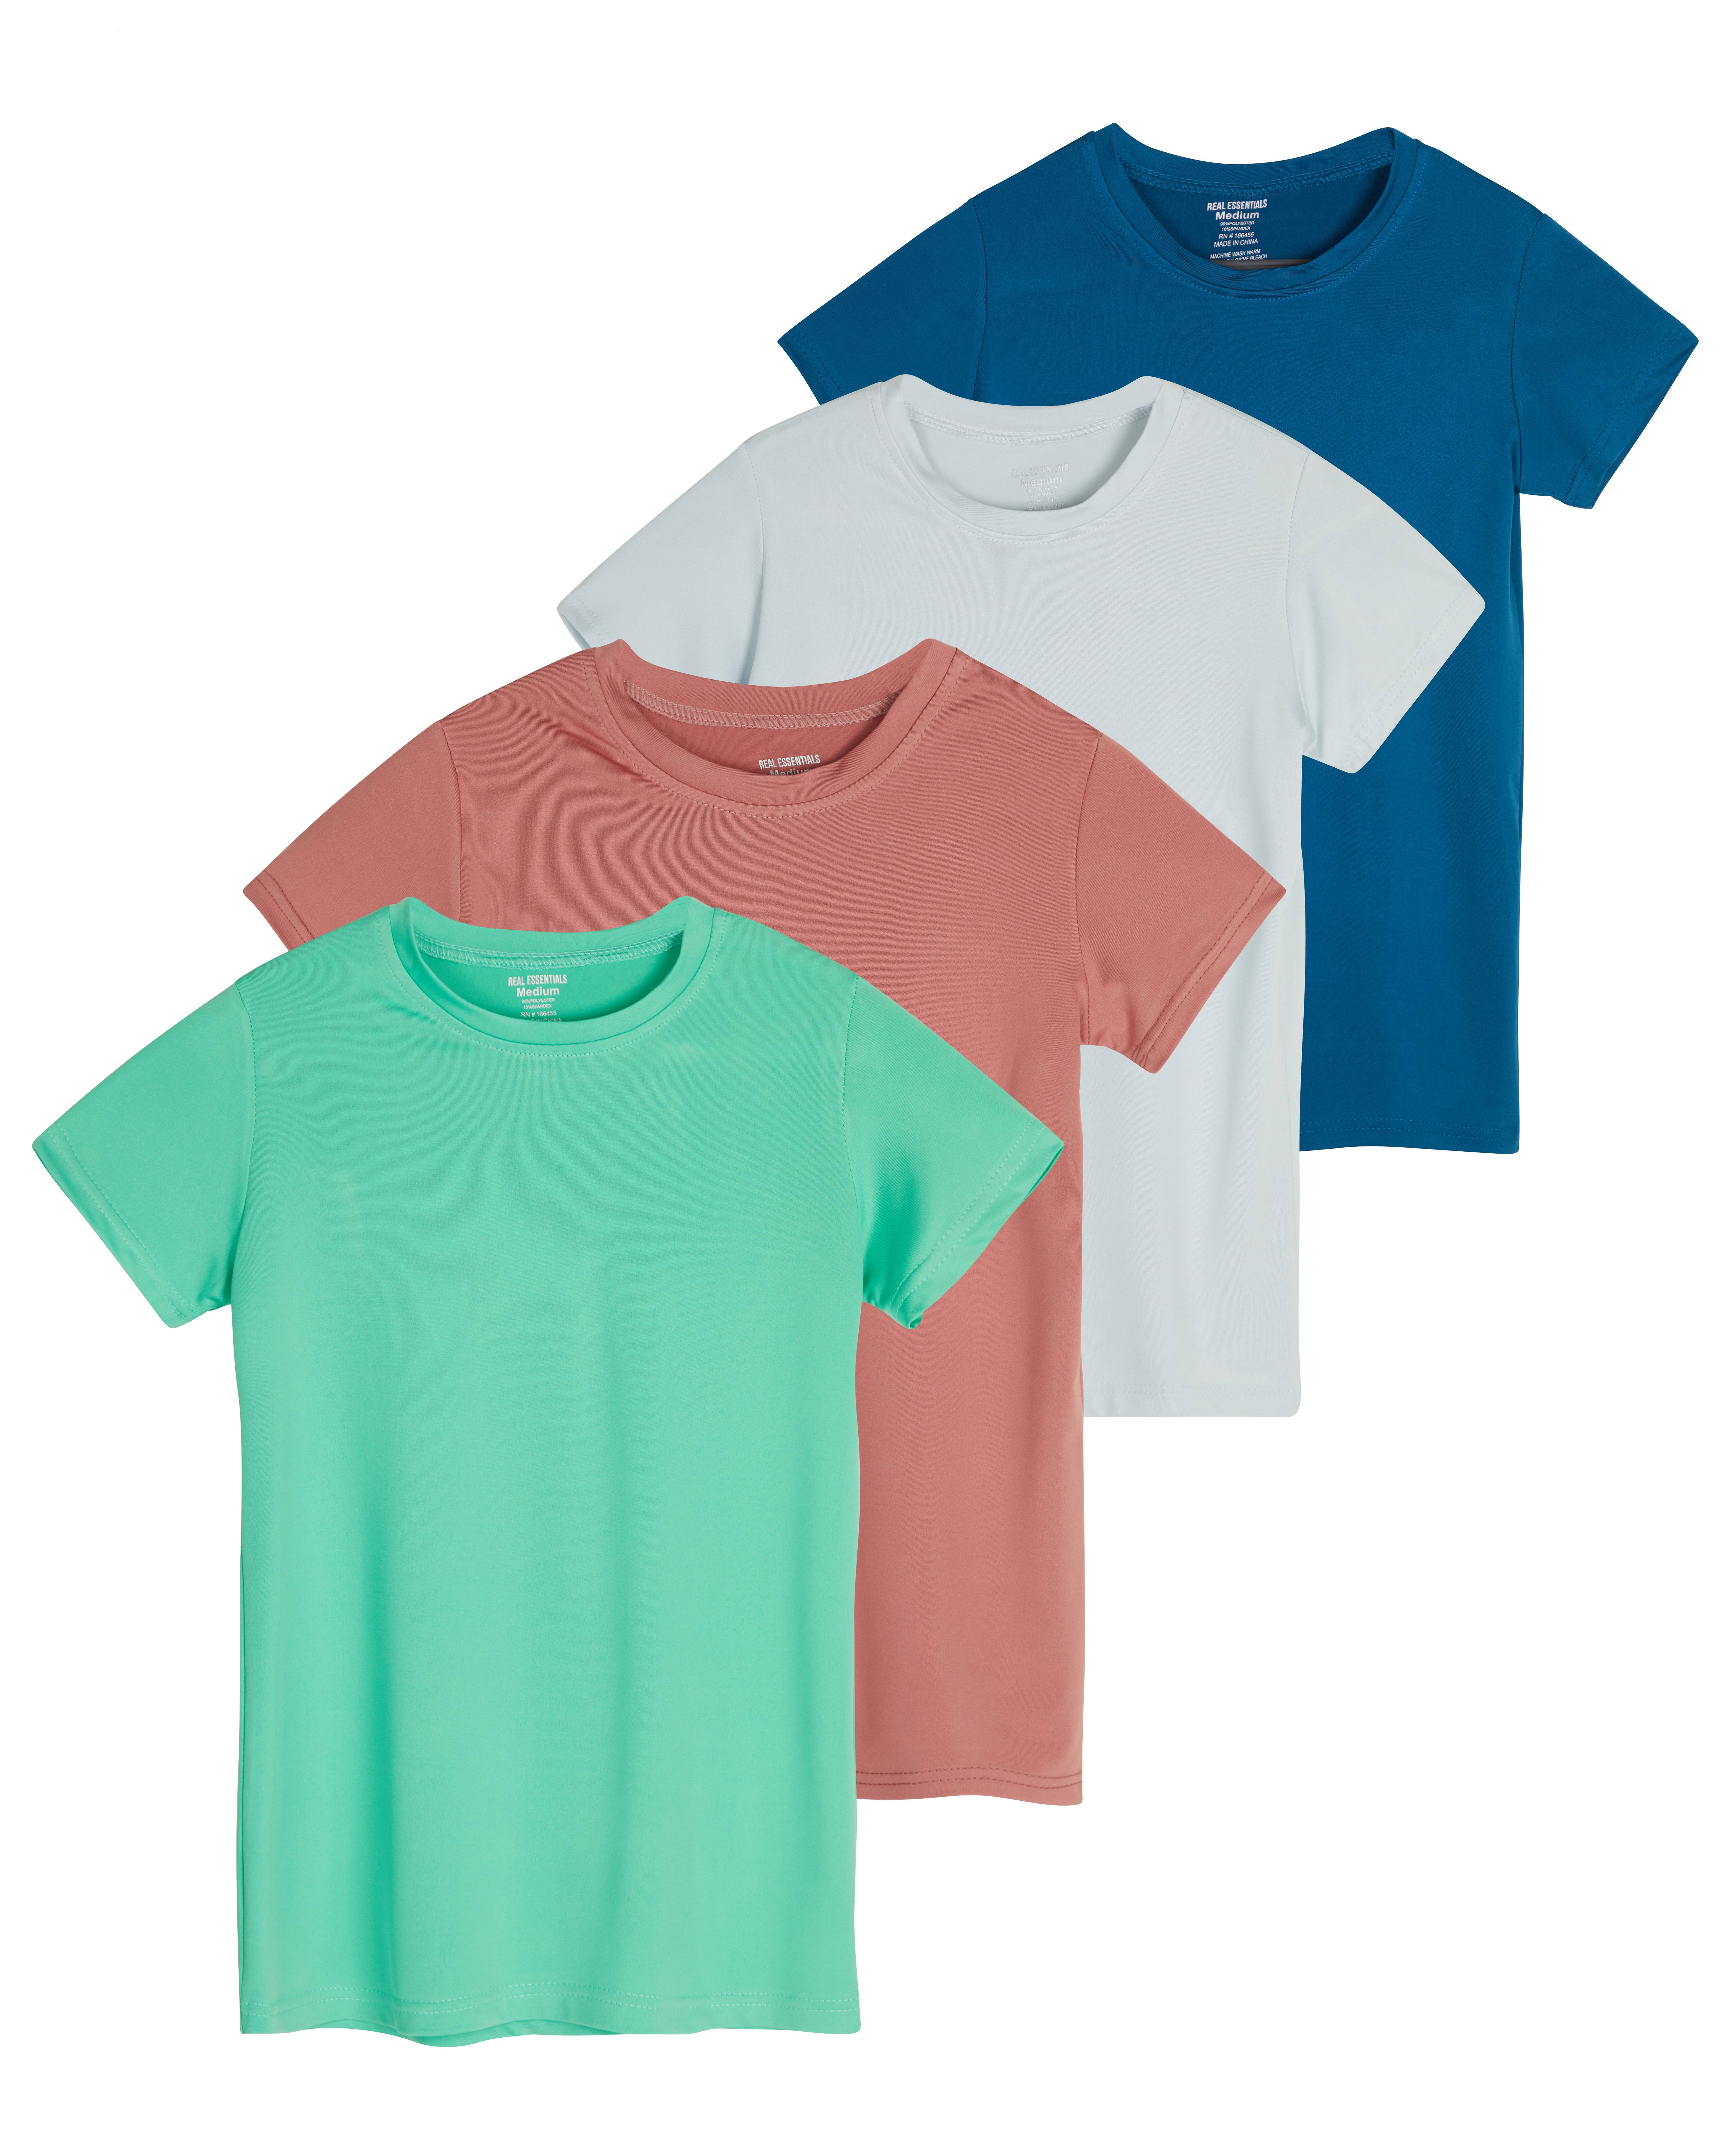 Tangerine Spandex Athletic T-Shirts for Women